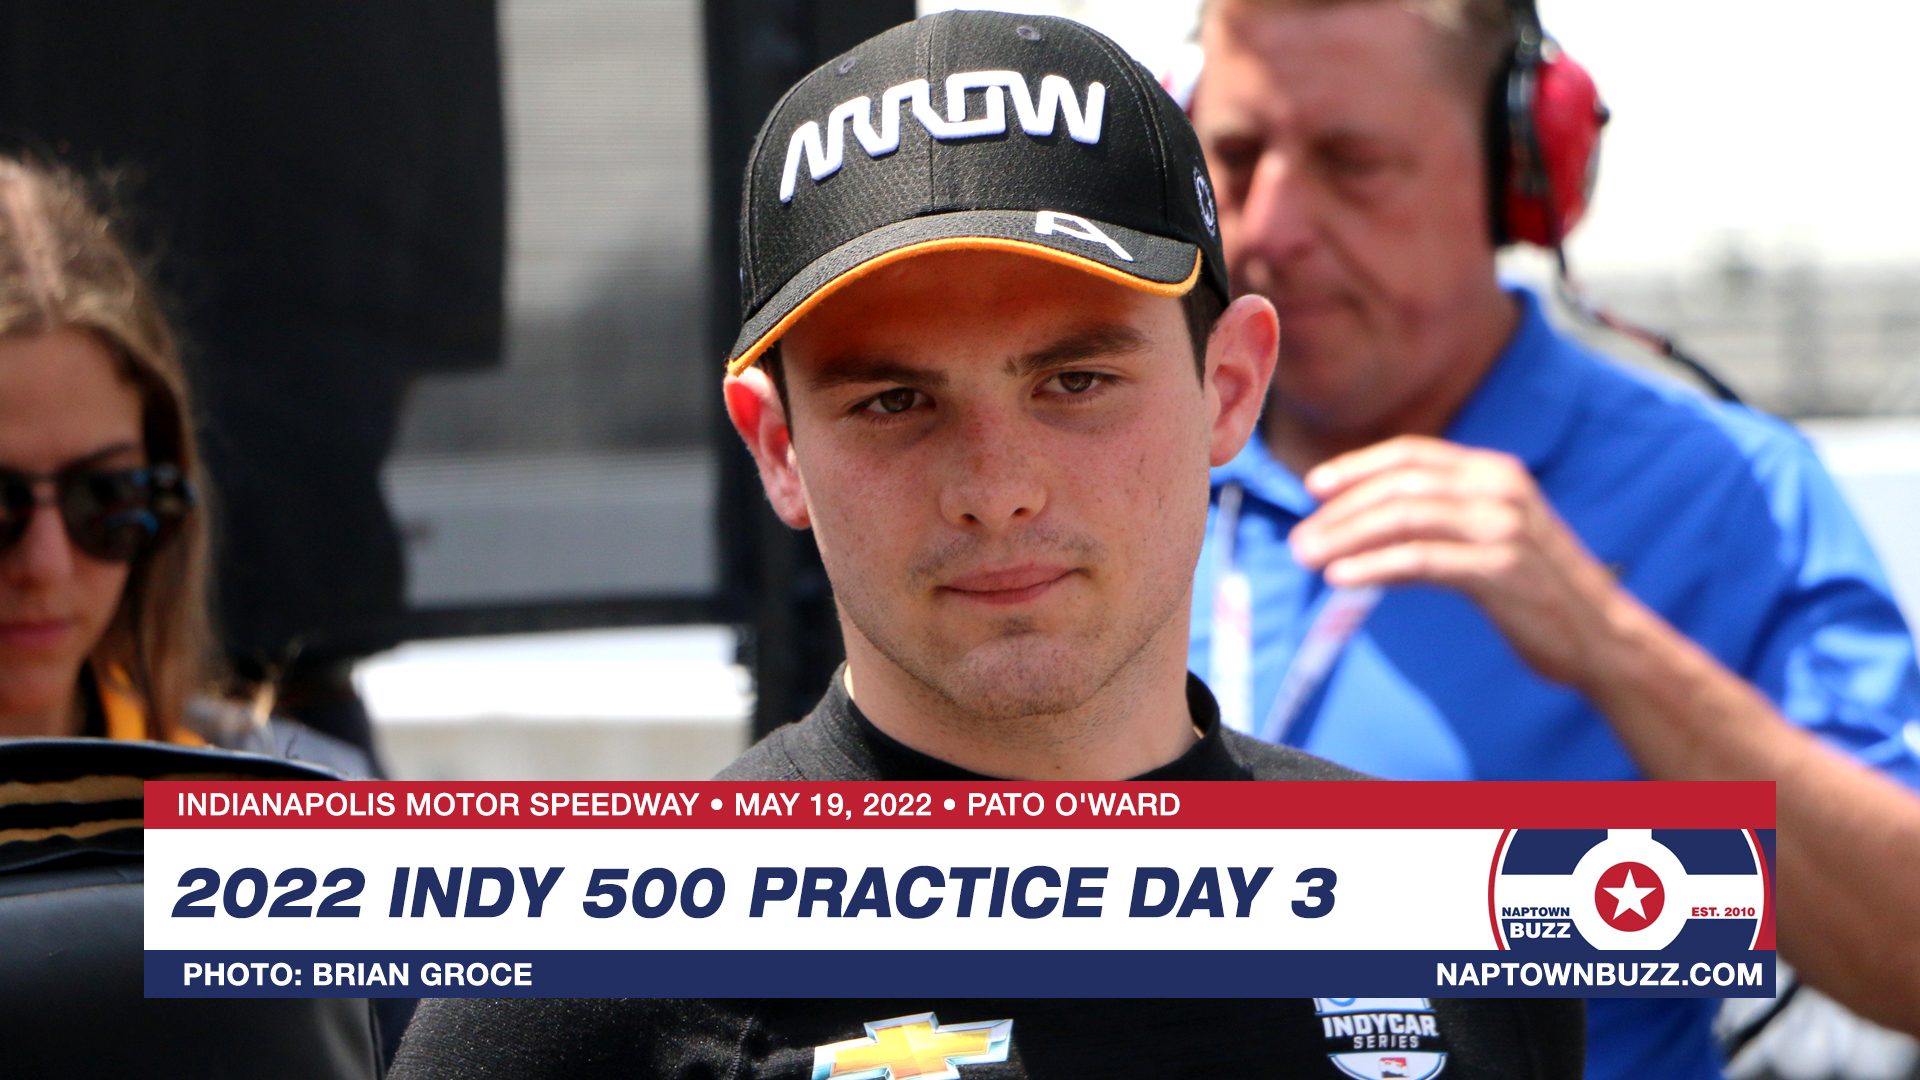 Pato O'Ward on Indy 500 Practice Day 3 at Indianapolis Motor Speedway on May 19, 2022